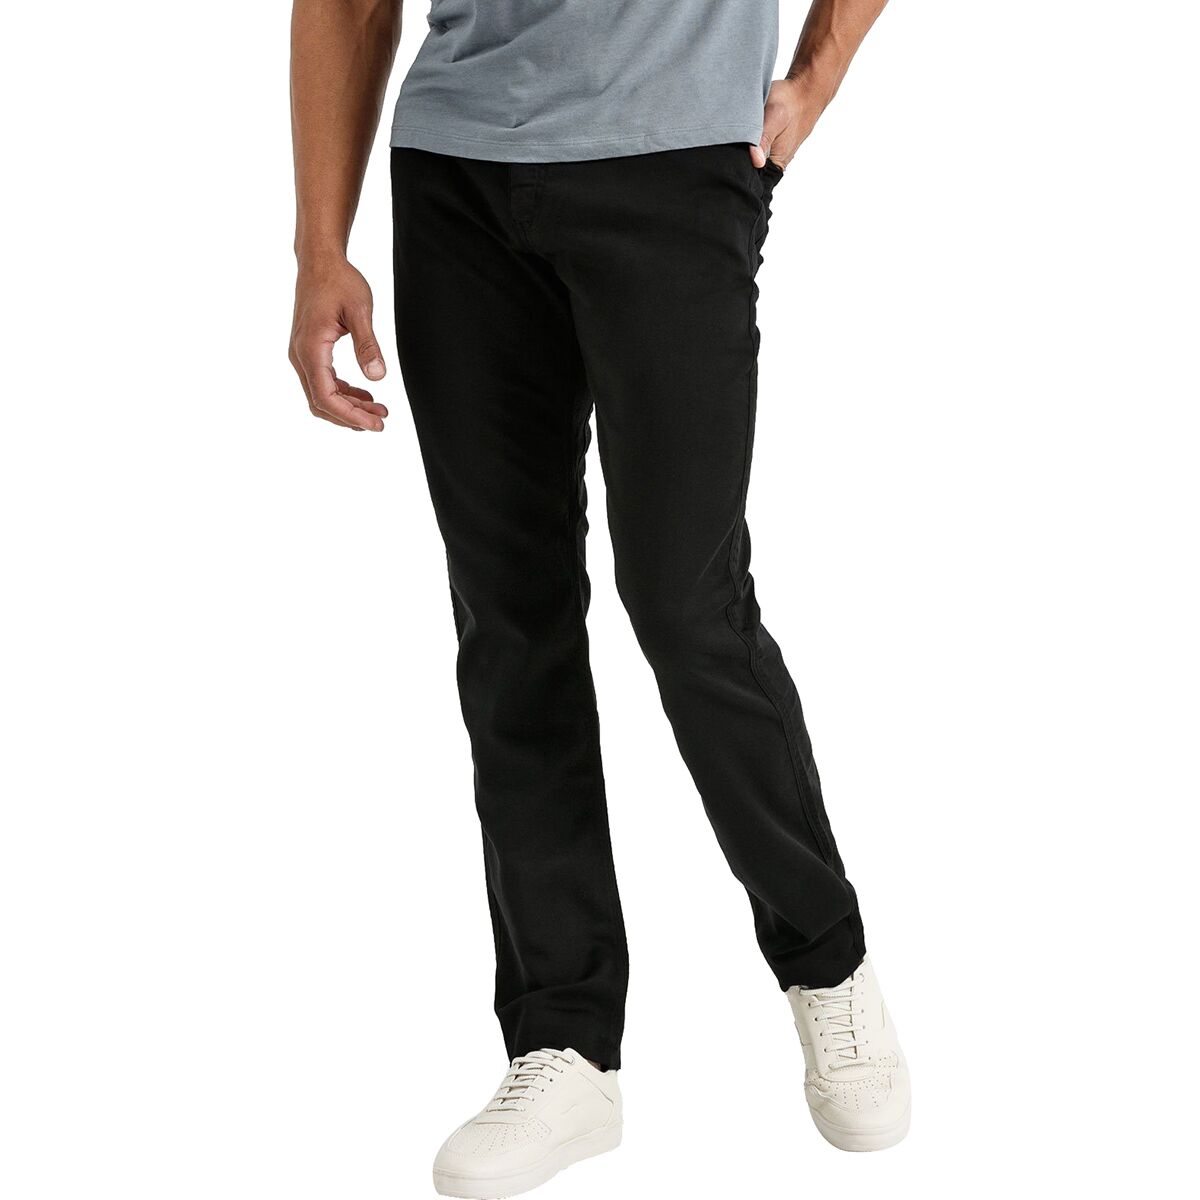 DU/ER No Sweat Relaxed Fit Pant - Men's - Clothing